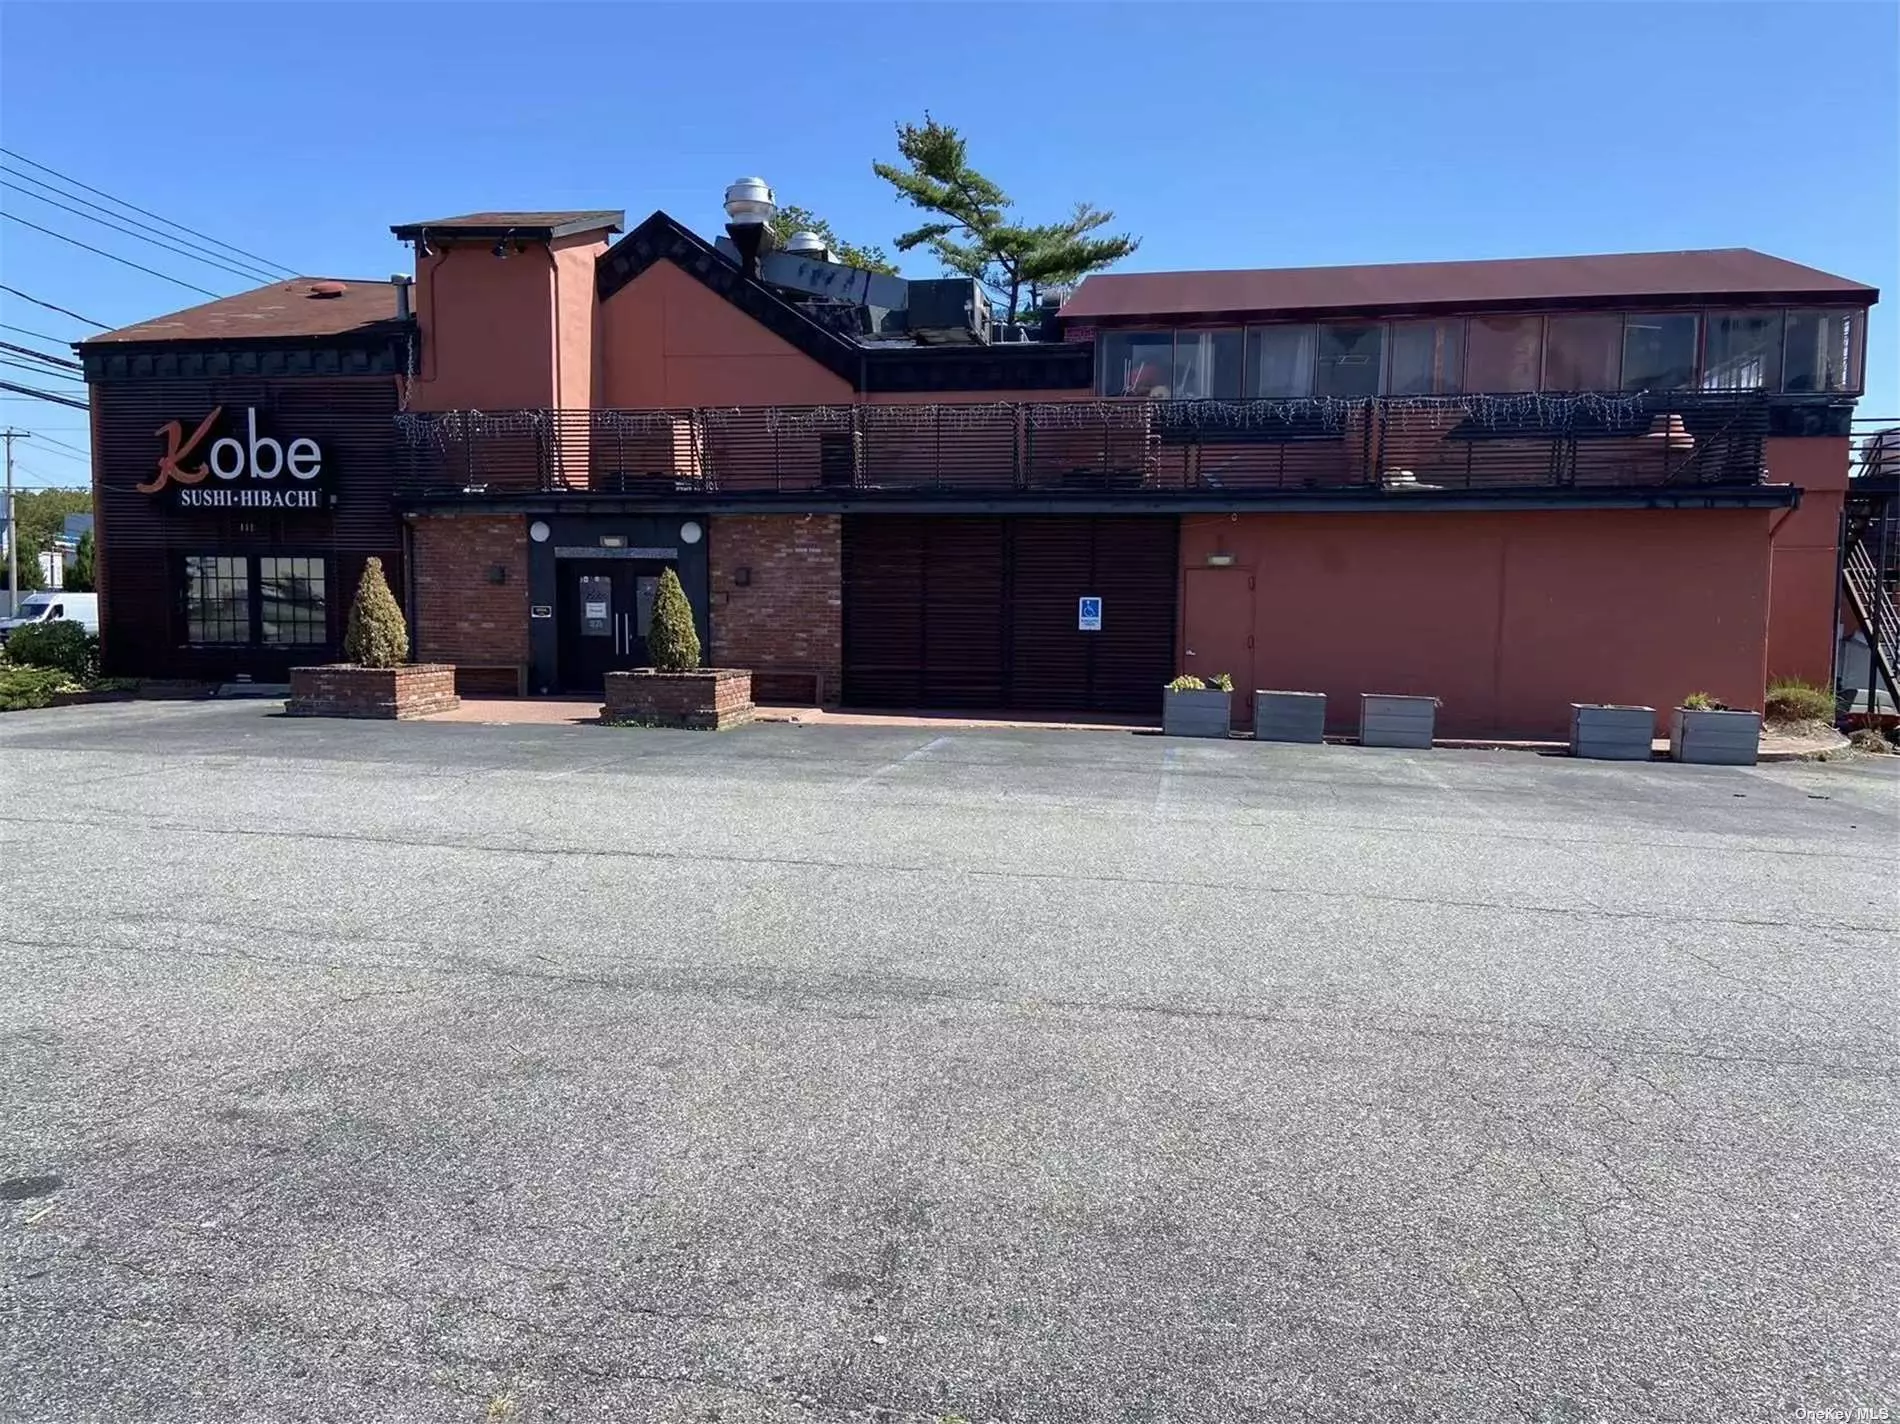 This property is located on Jericho Turnpike with non-stop drive-by traffic 24/7/365, over 29, 000 vehicles per day and next to various national brand/local retail stores. Ideally suited for a retail/restaurant building with ample parking space for potential retail customers. It is in close proximity to shopping centers. Easy access to LI Expressway and Northern Parkway.